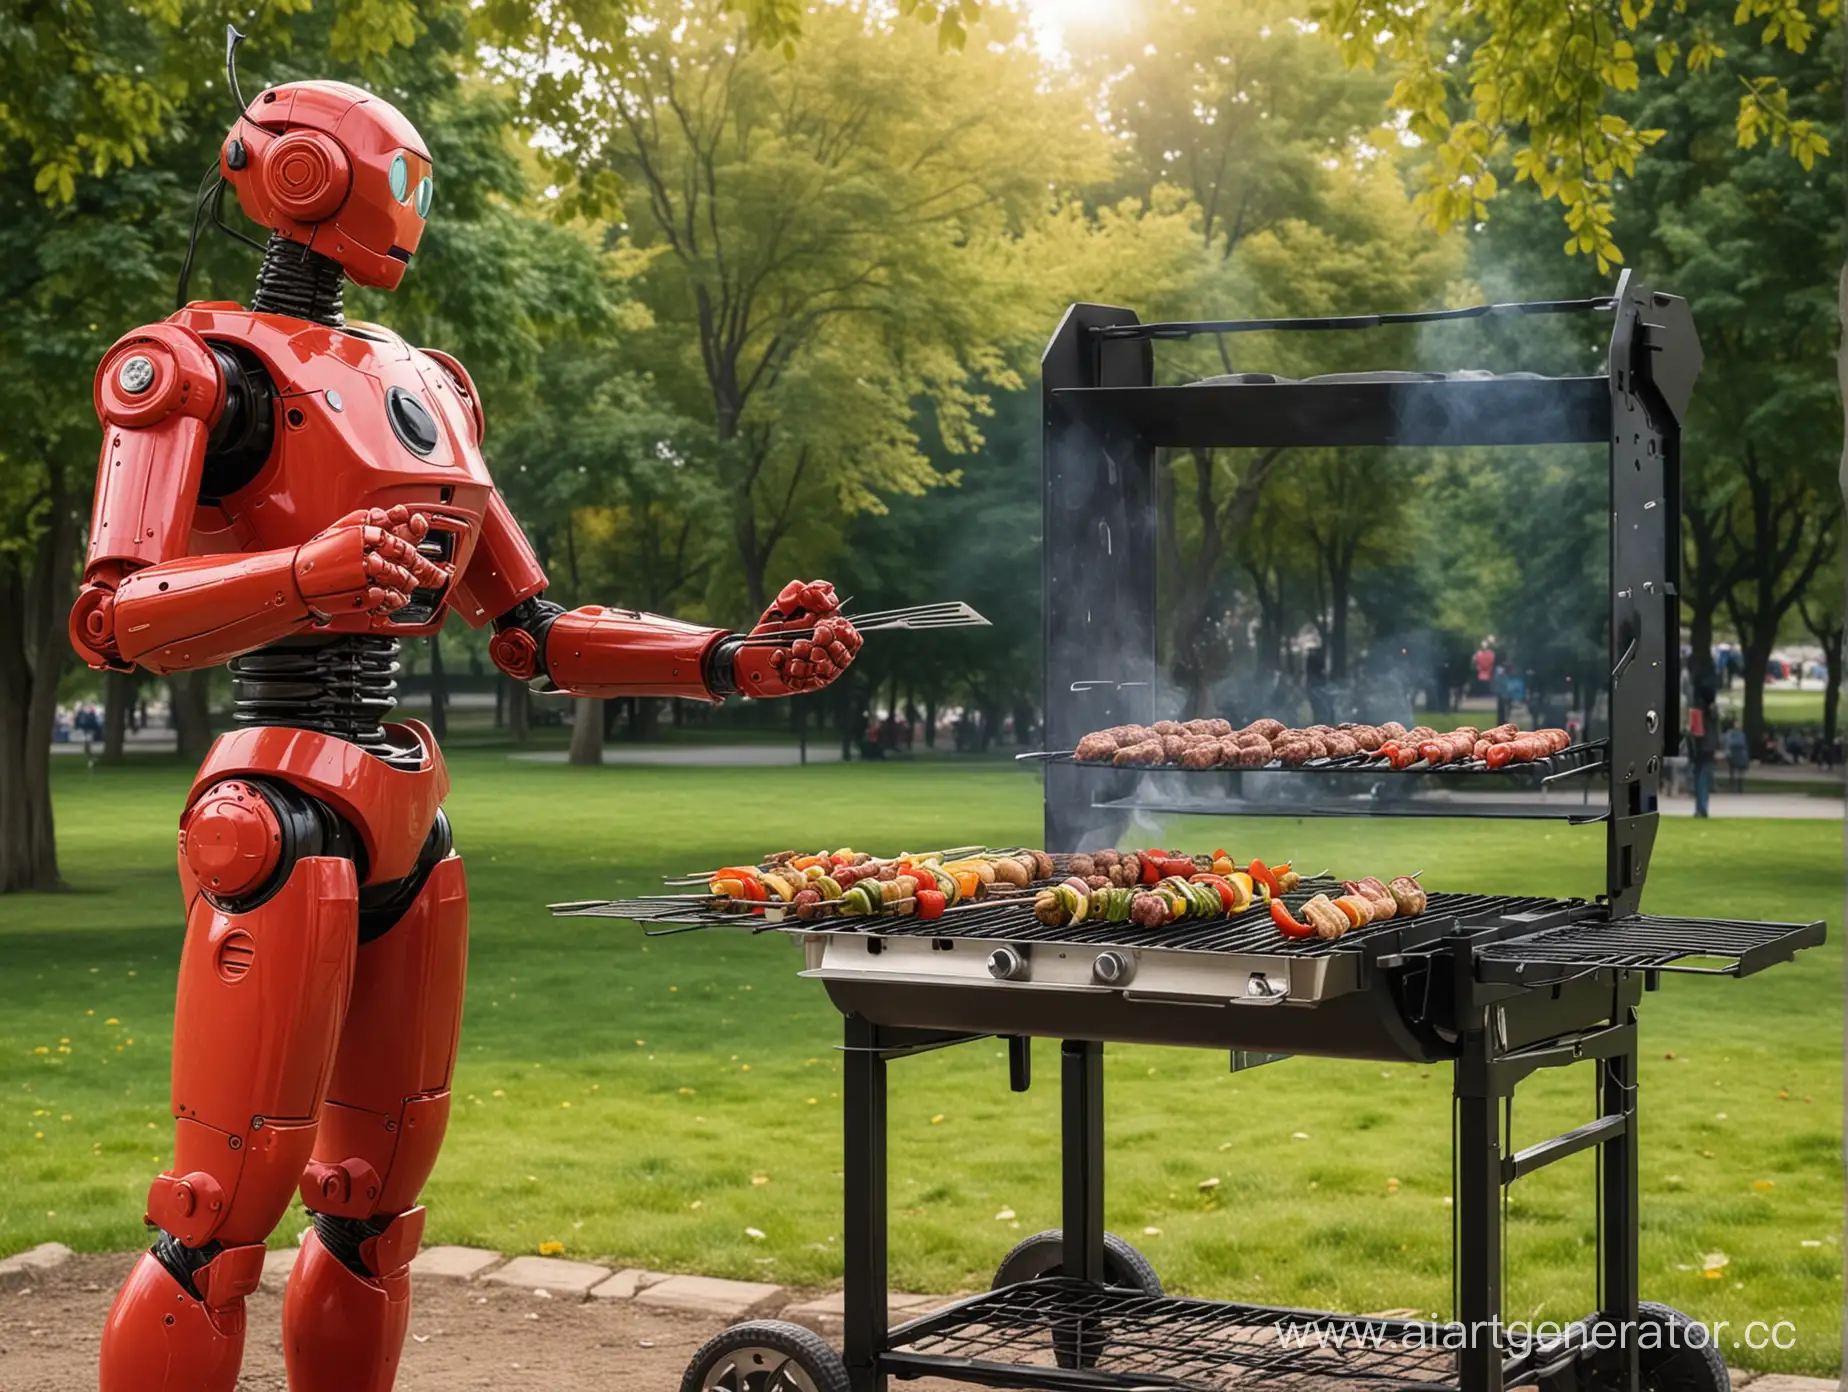 Red-Robot-Grilling-Kebabs-in-the-Park